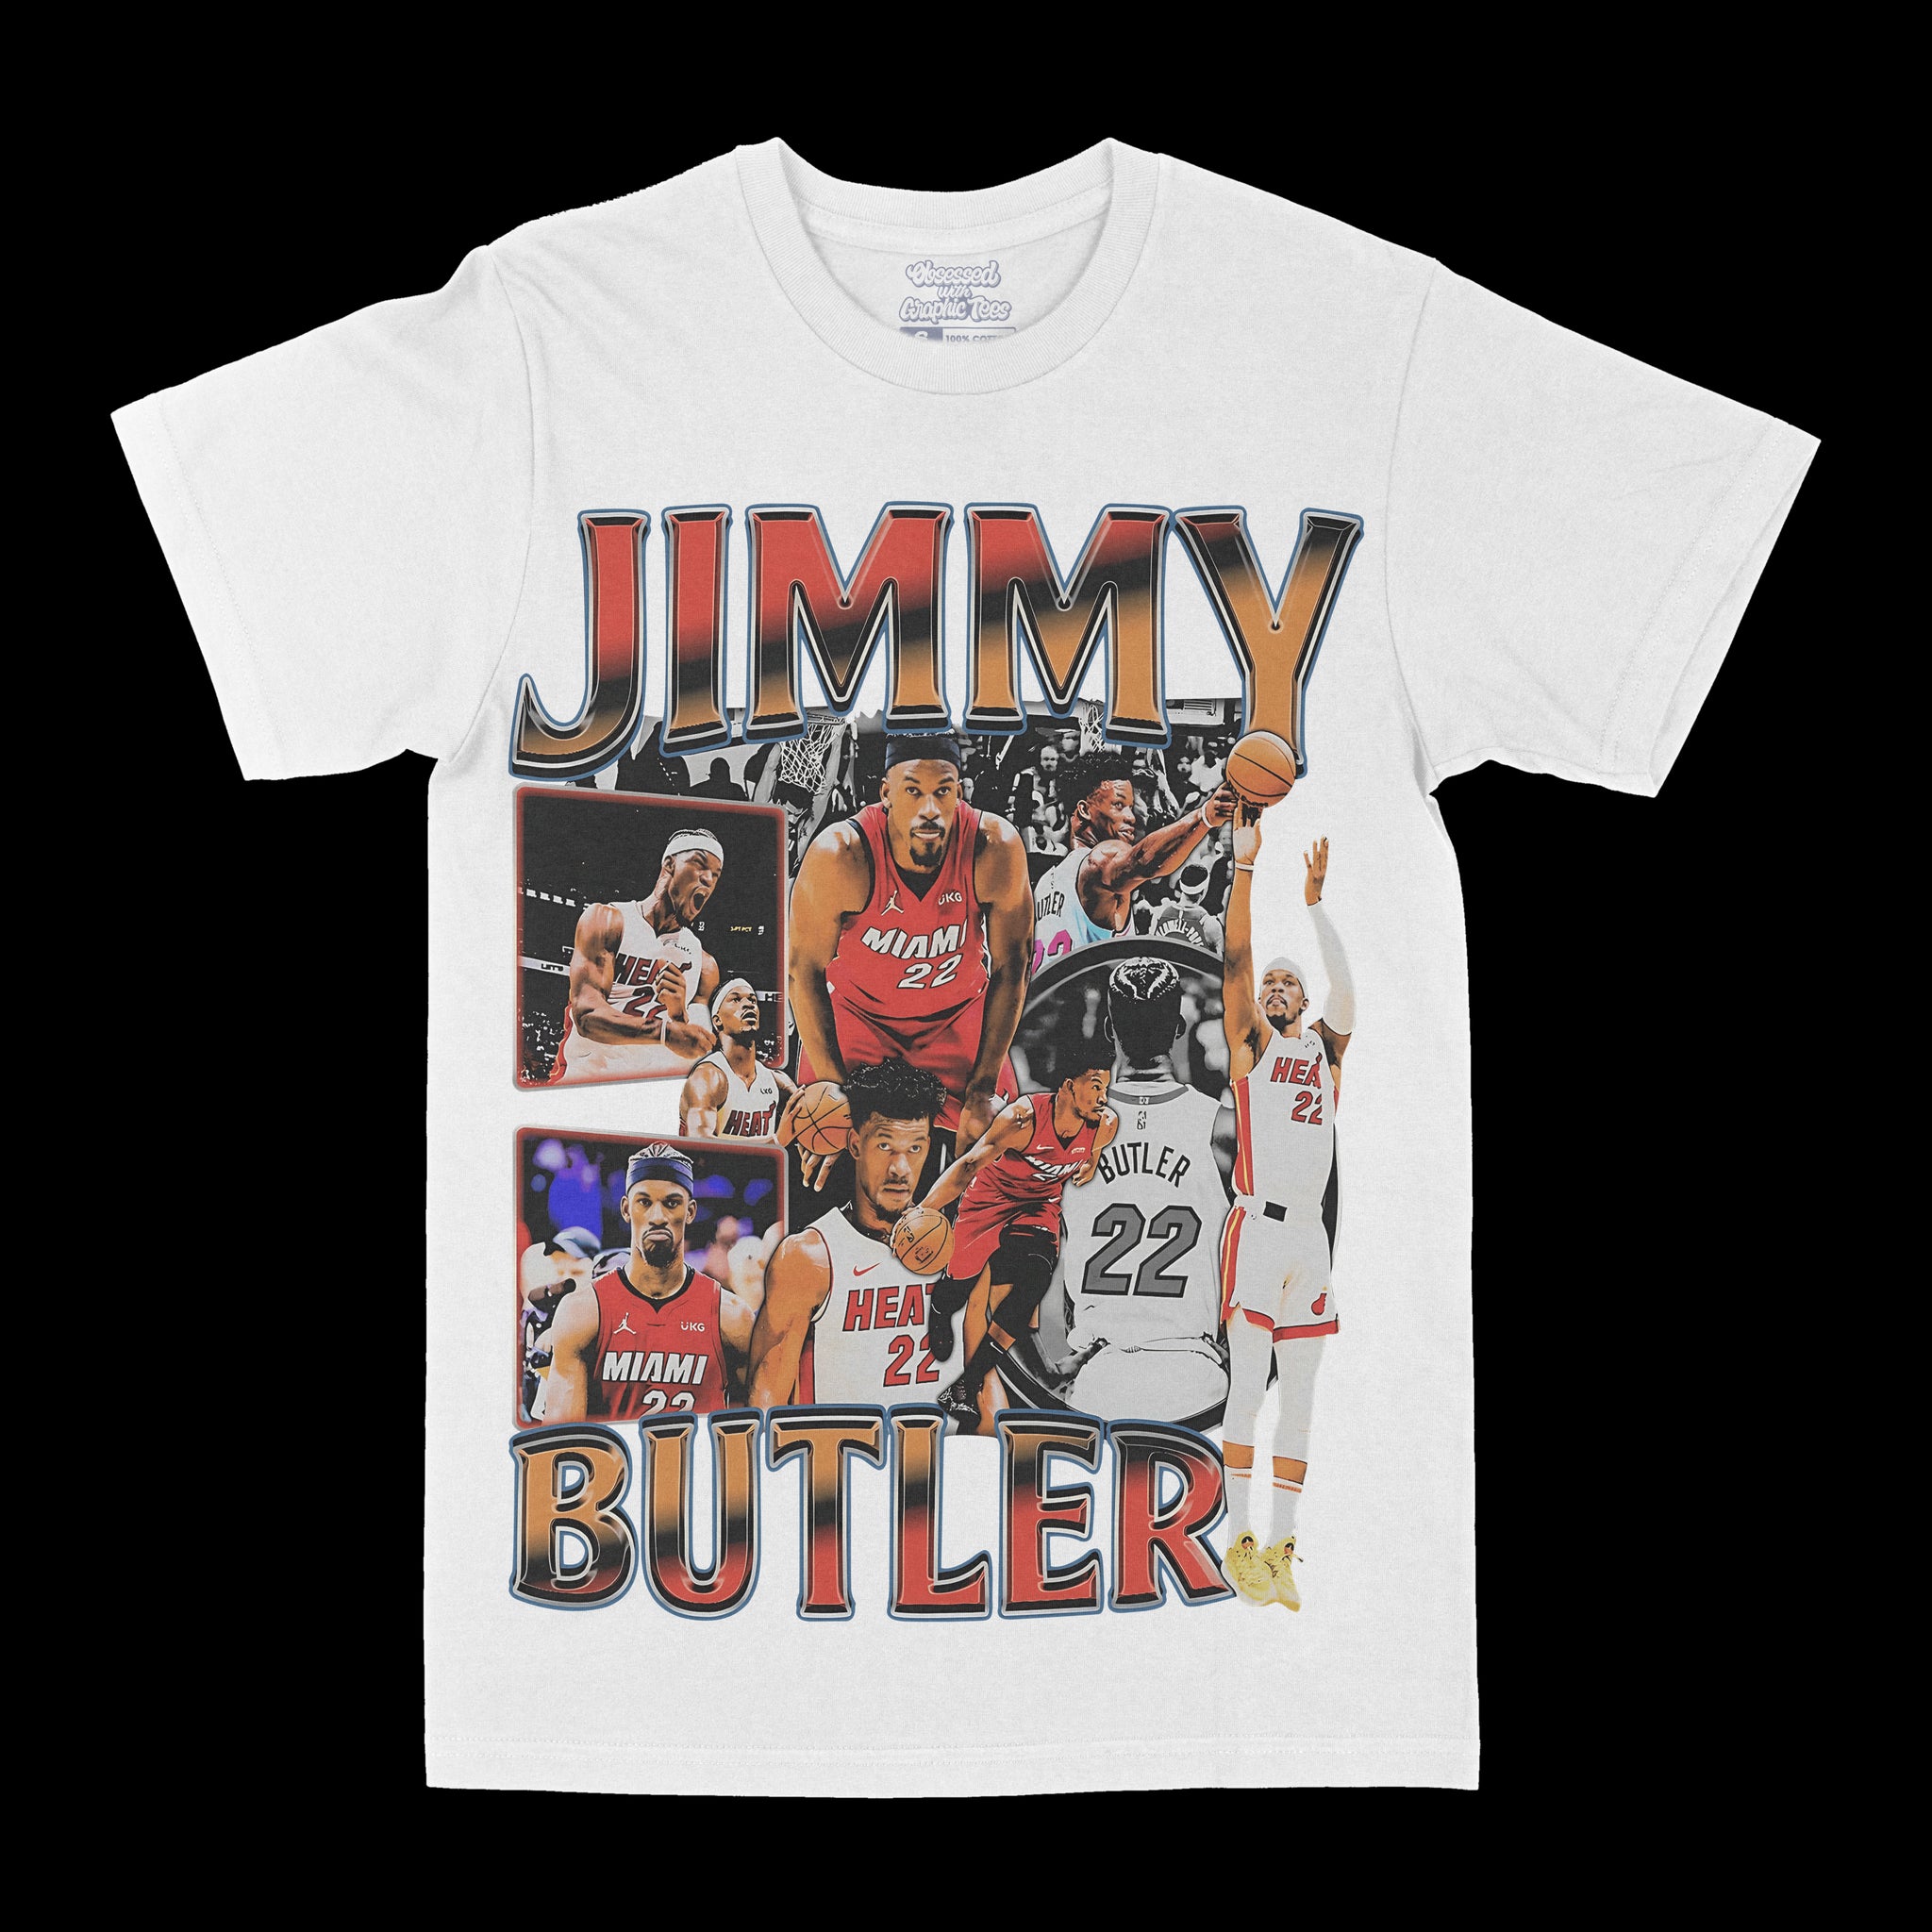 Jimmy Butler "22" Graphic Tee